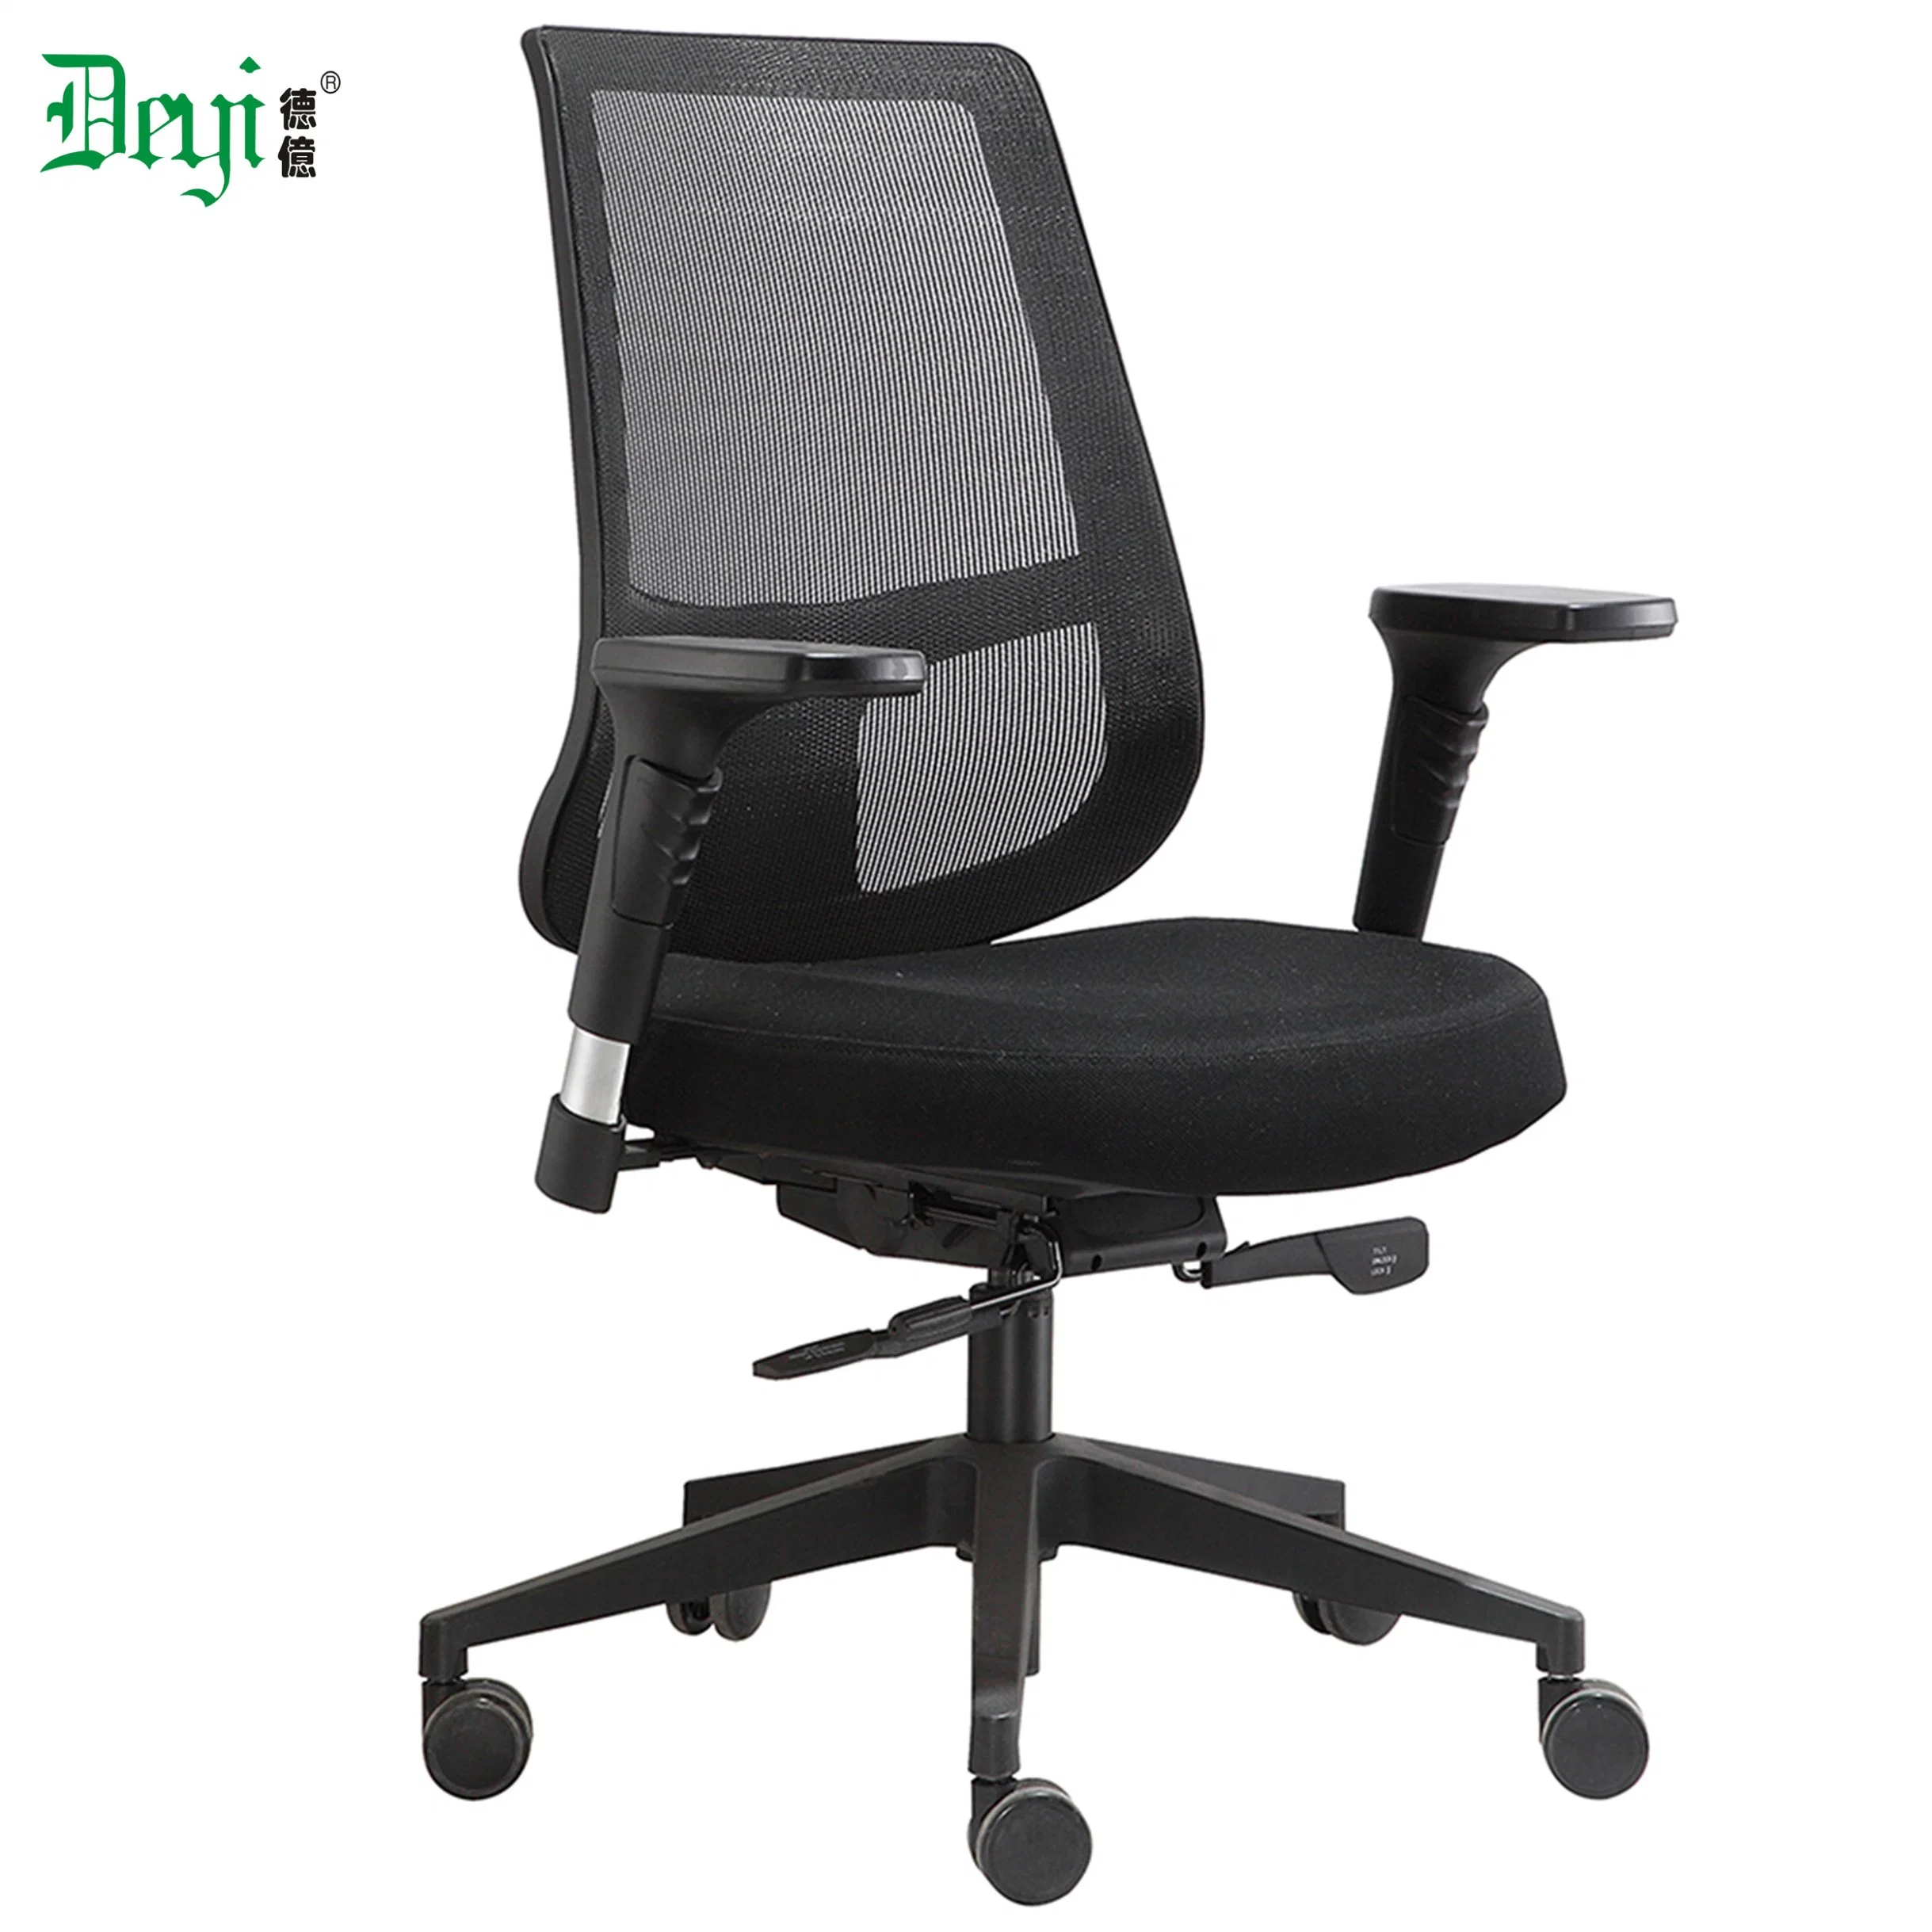 Swivel Office Use Mesh Fabric Upholstery Functional Computer Executive Chair